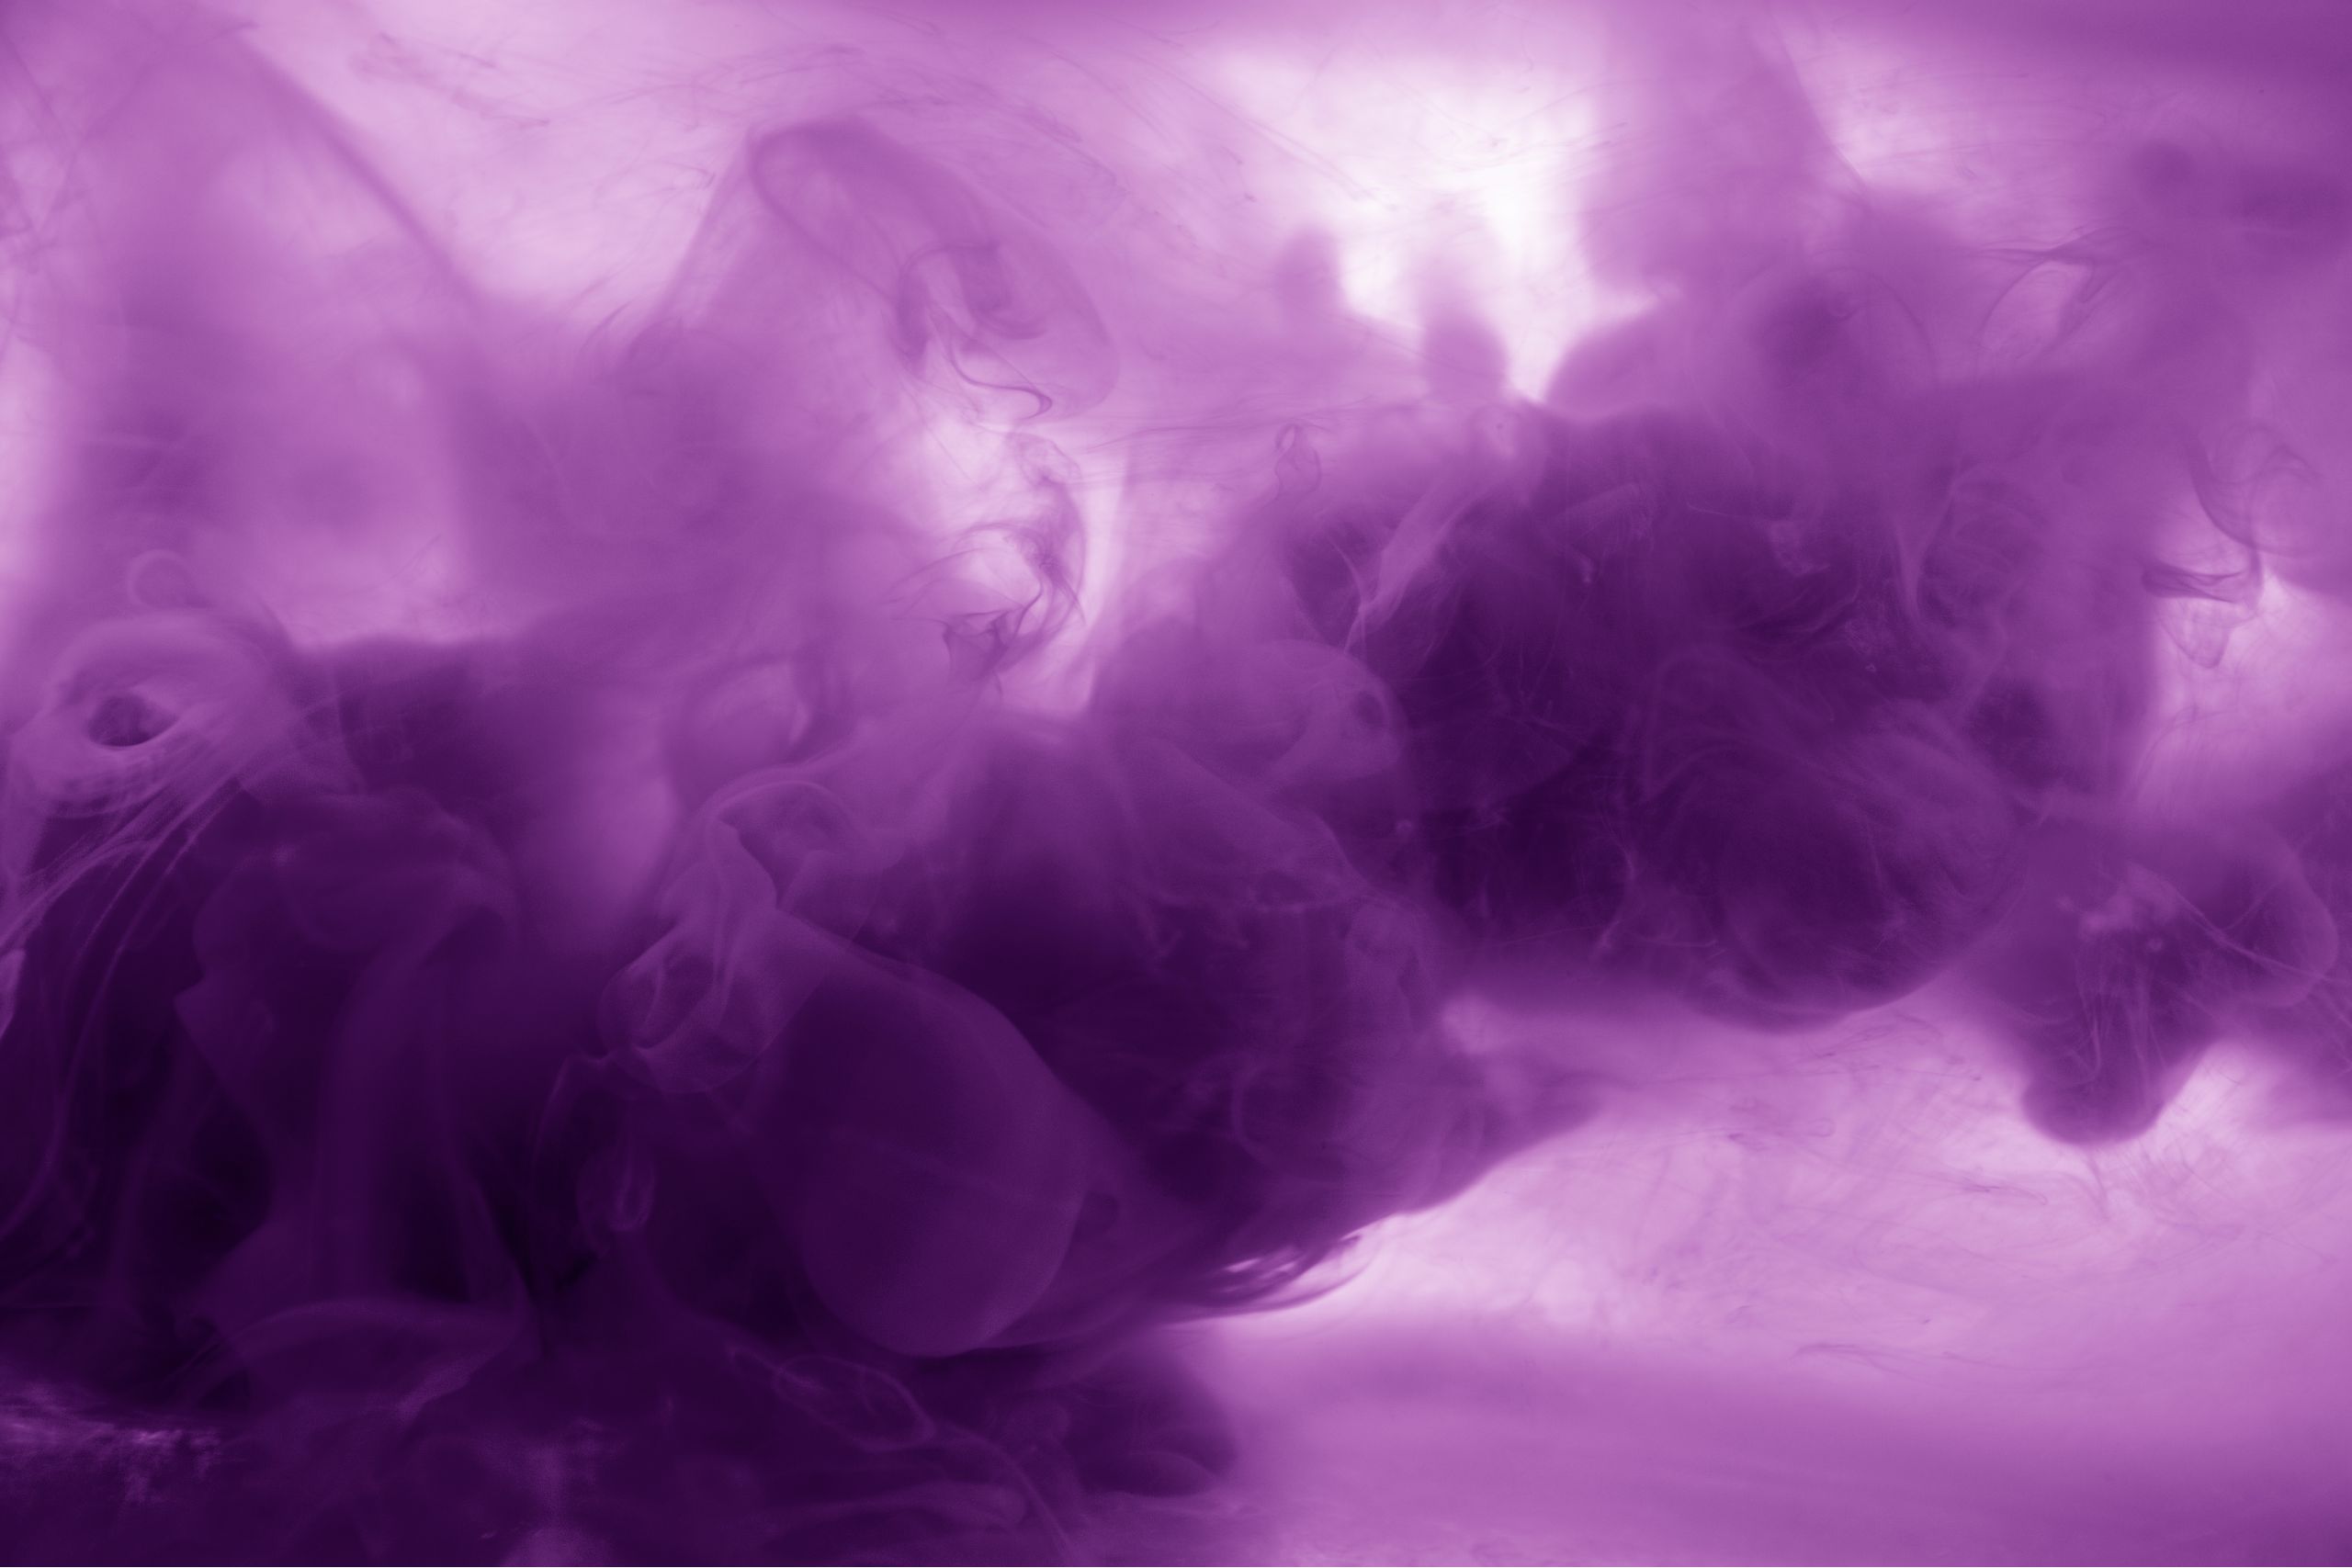 This is a photo of liquid that is a cloudy purple. It is the header image for the 'What is purple urinary bag syndrome' article on the Urostomy Association's website